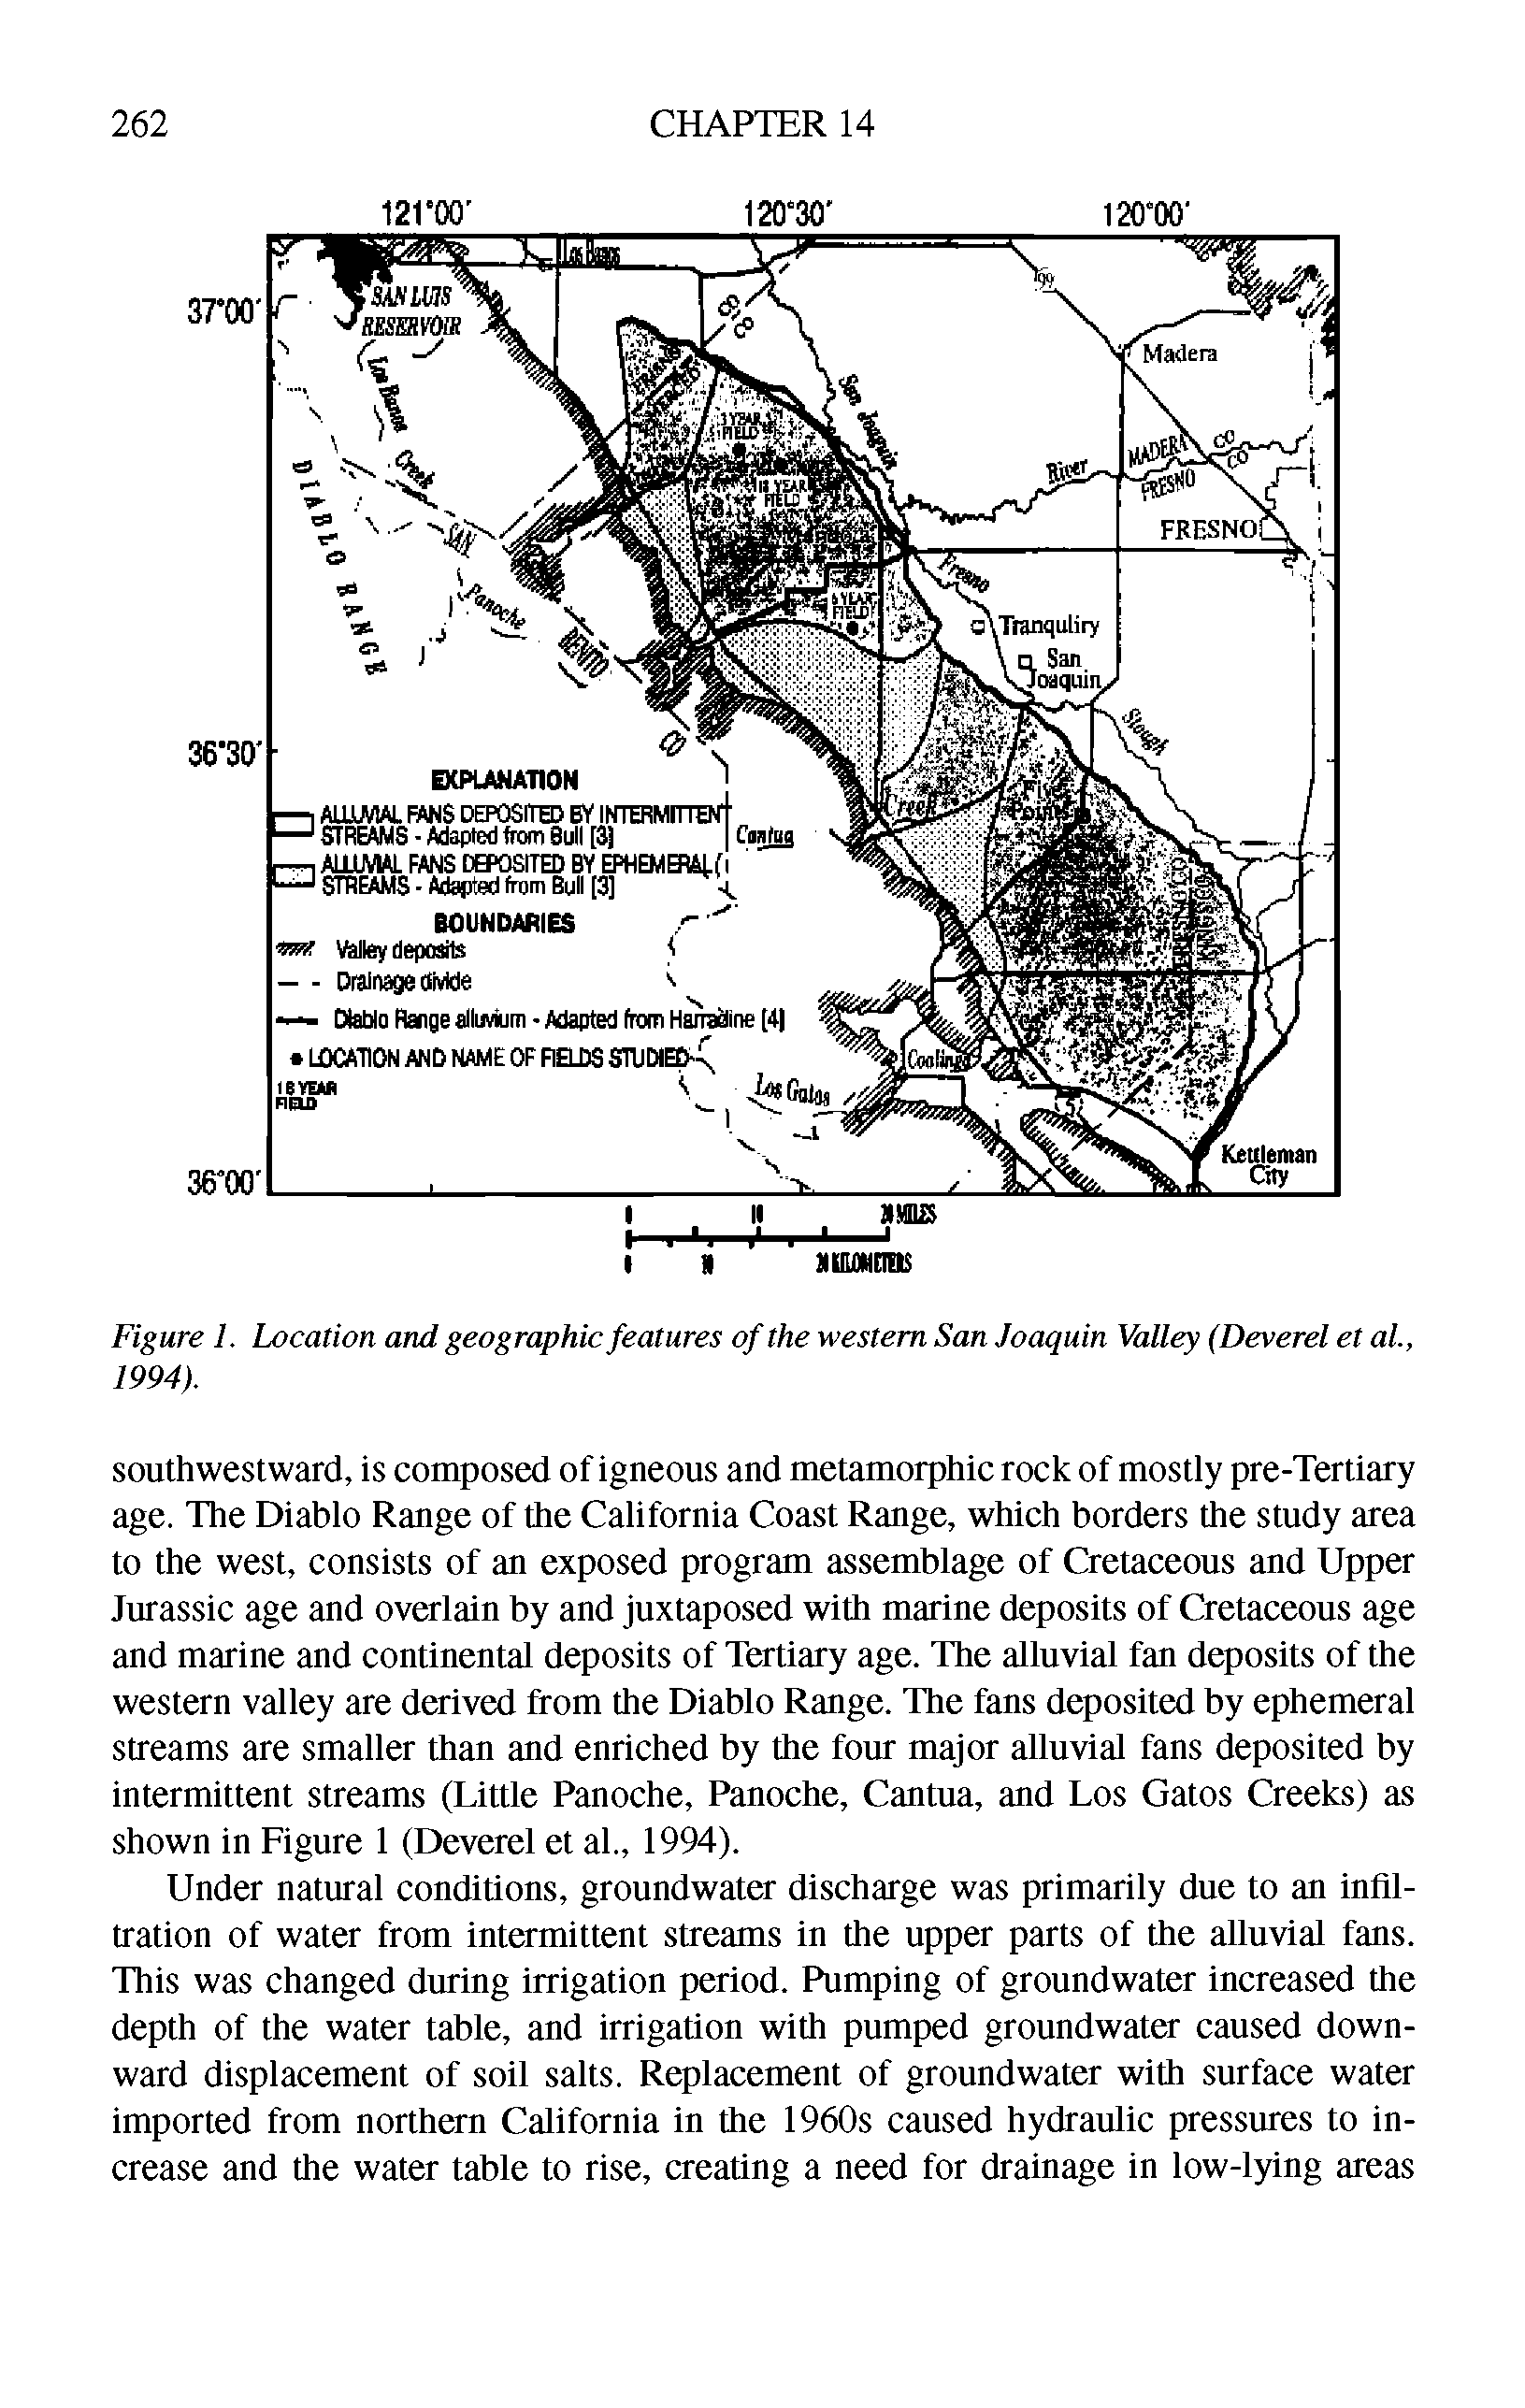 Figure 1. Location and geographic features of the western San Joaquin Valley (Deverel et al., 1994).